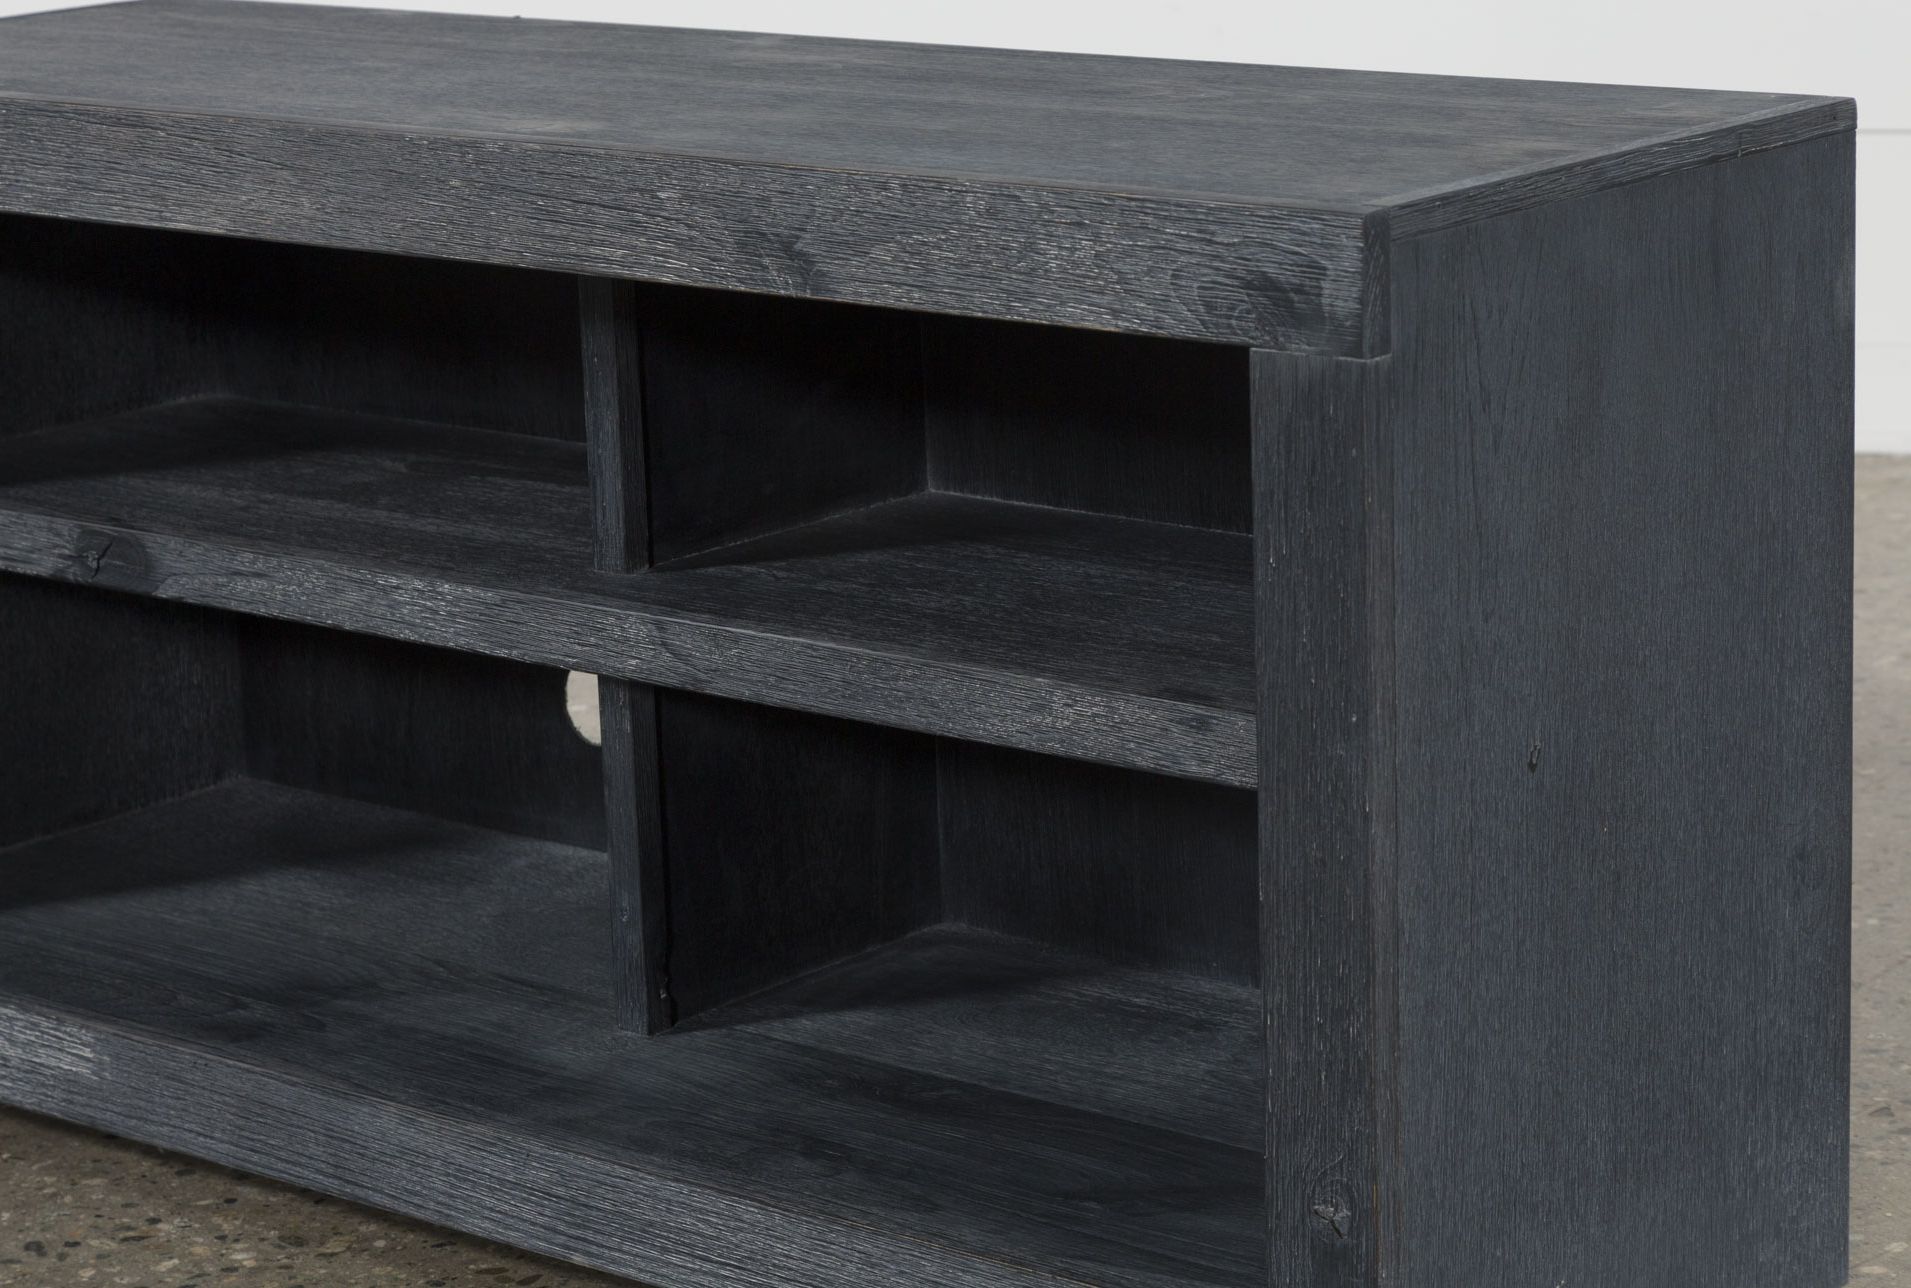 Kilian Black 49 Inch Tv Stand | Products | Pinterest | Black With Regard To Kilian Black 49 Inch Tv Stands (View 1 of 20)